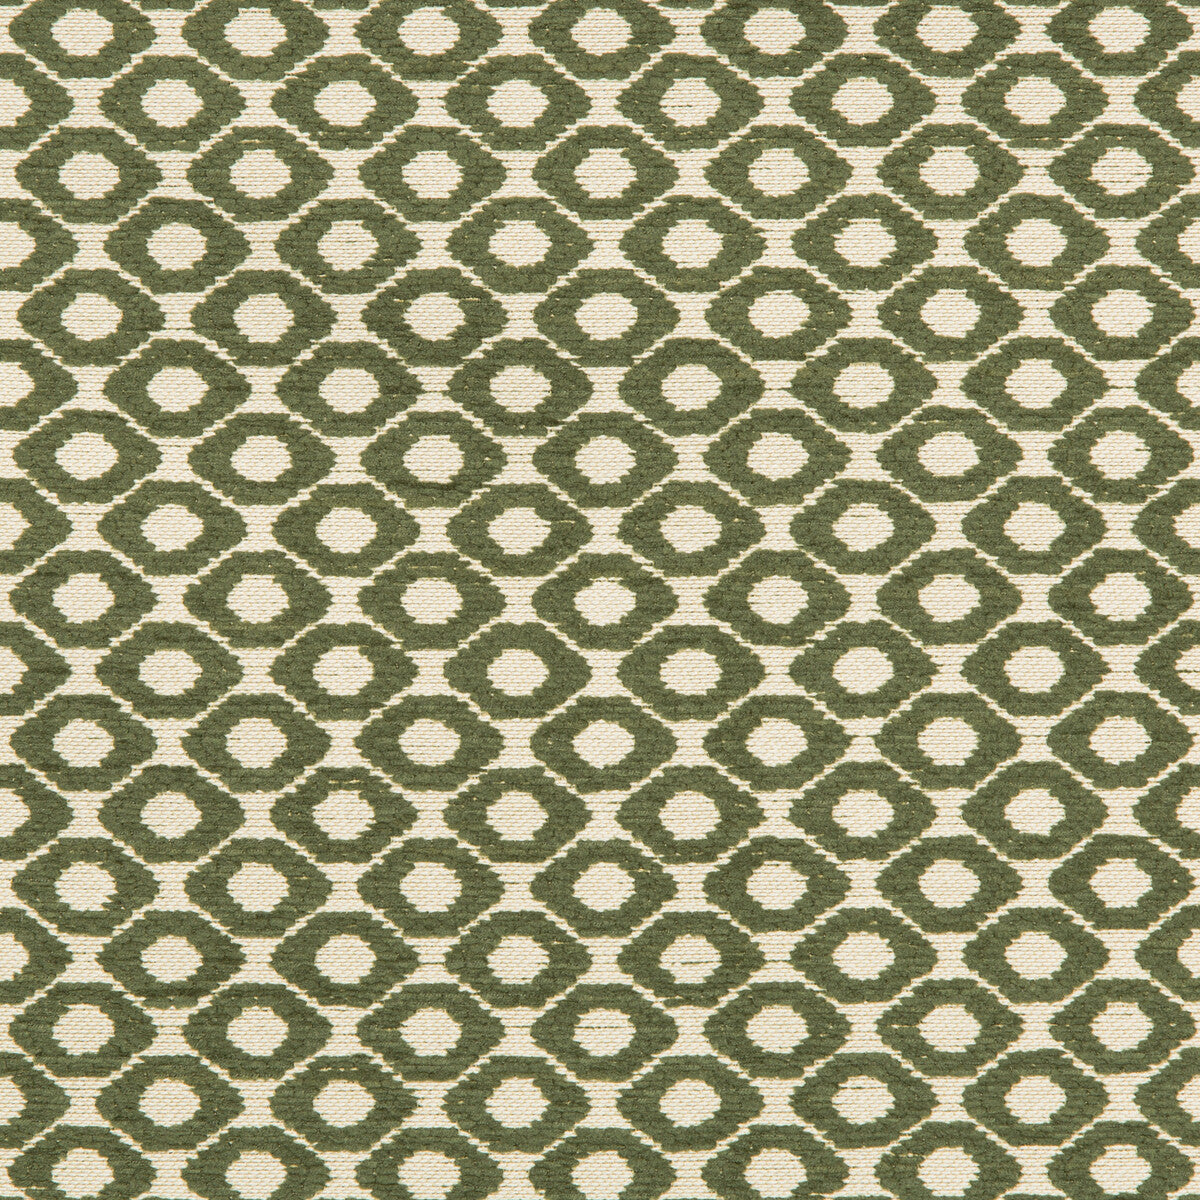 Pave The Way fabric in boxwod color - pattern 35867.30.0 - by Kravet Contract in the Gis Crypton collection